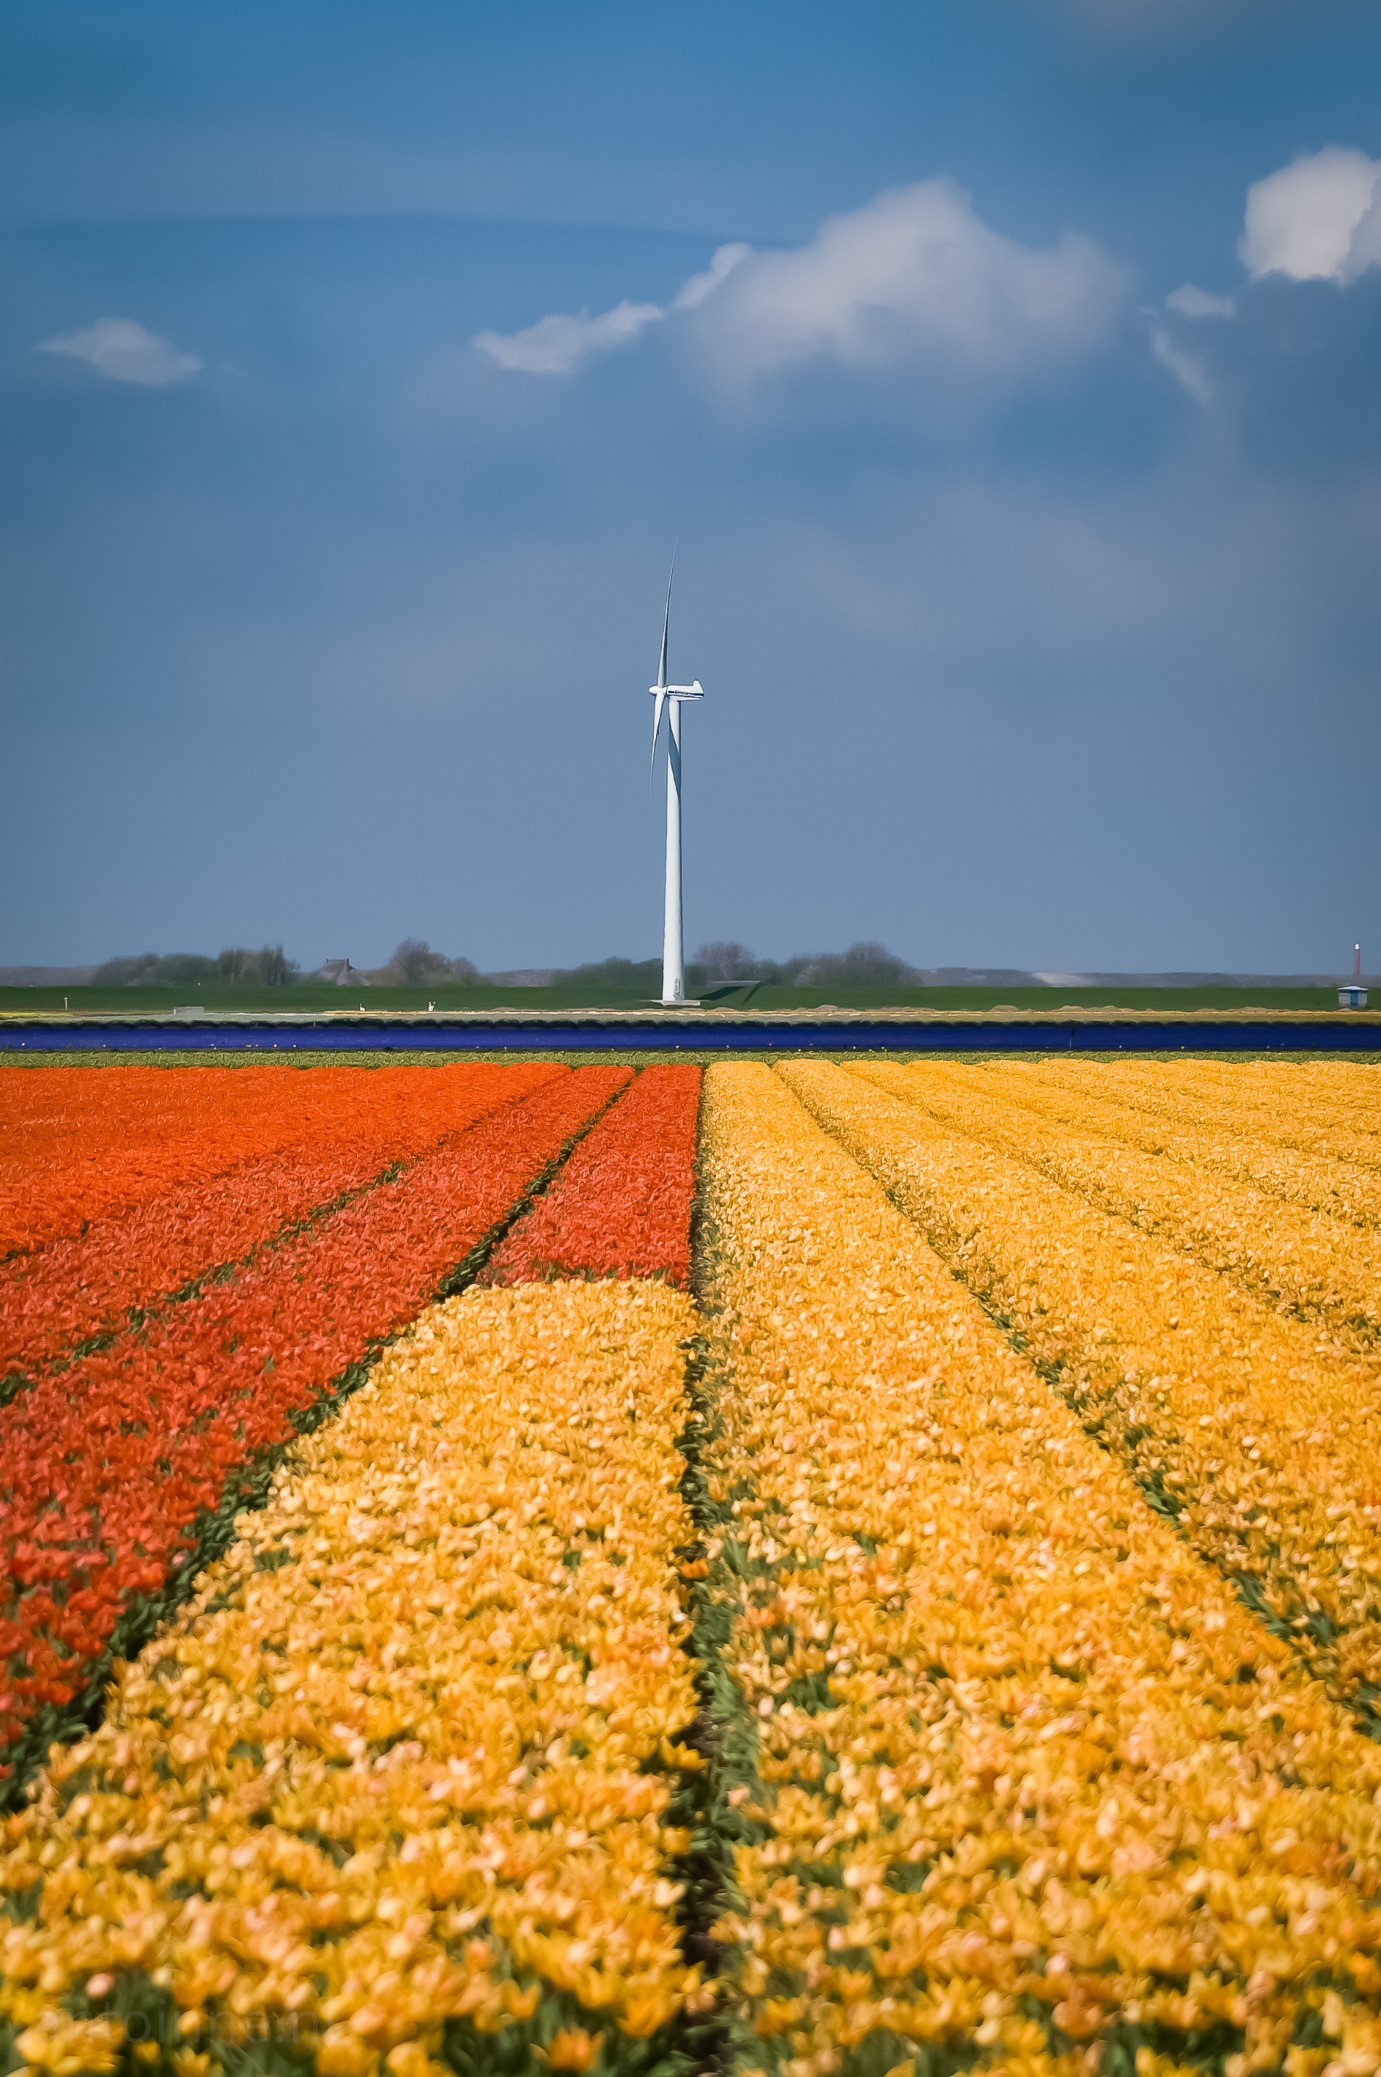 A field of red, yellow and blue tulips stretches out in front of you. On the horizon is a wind turbine.